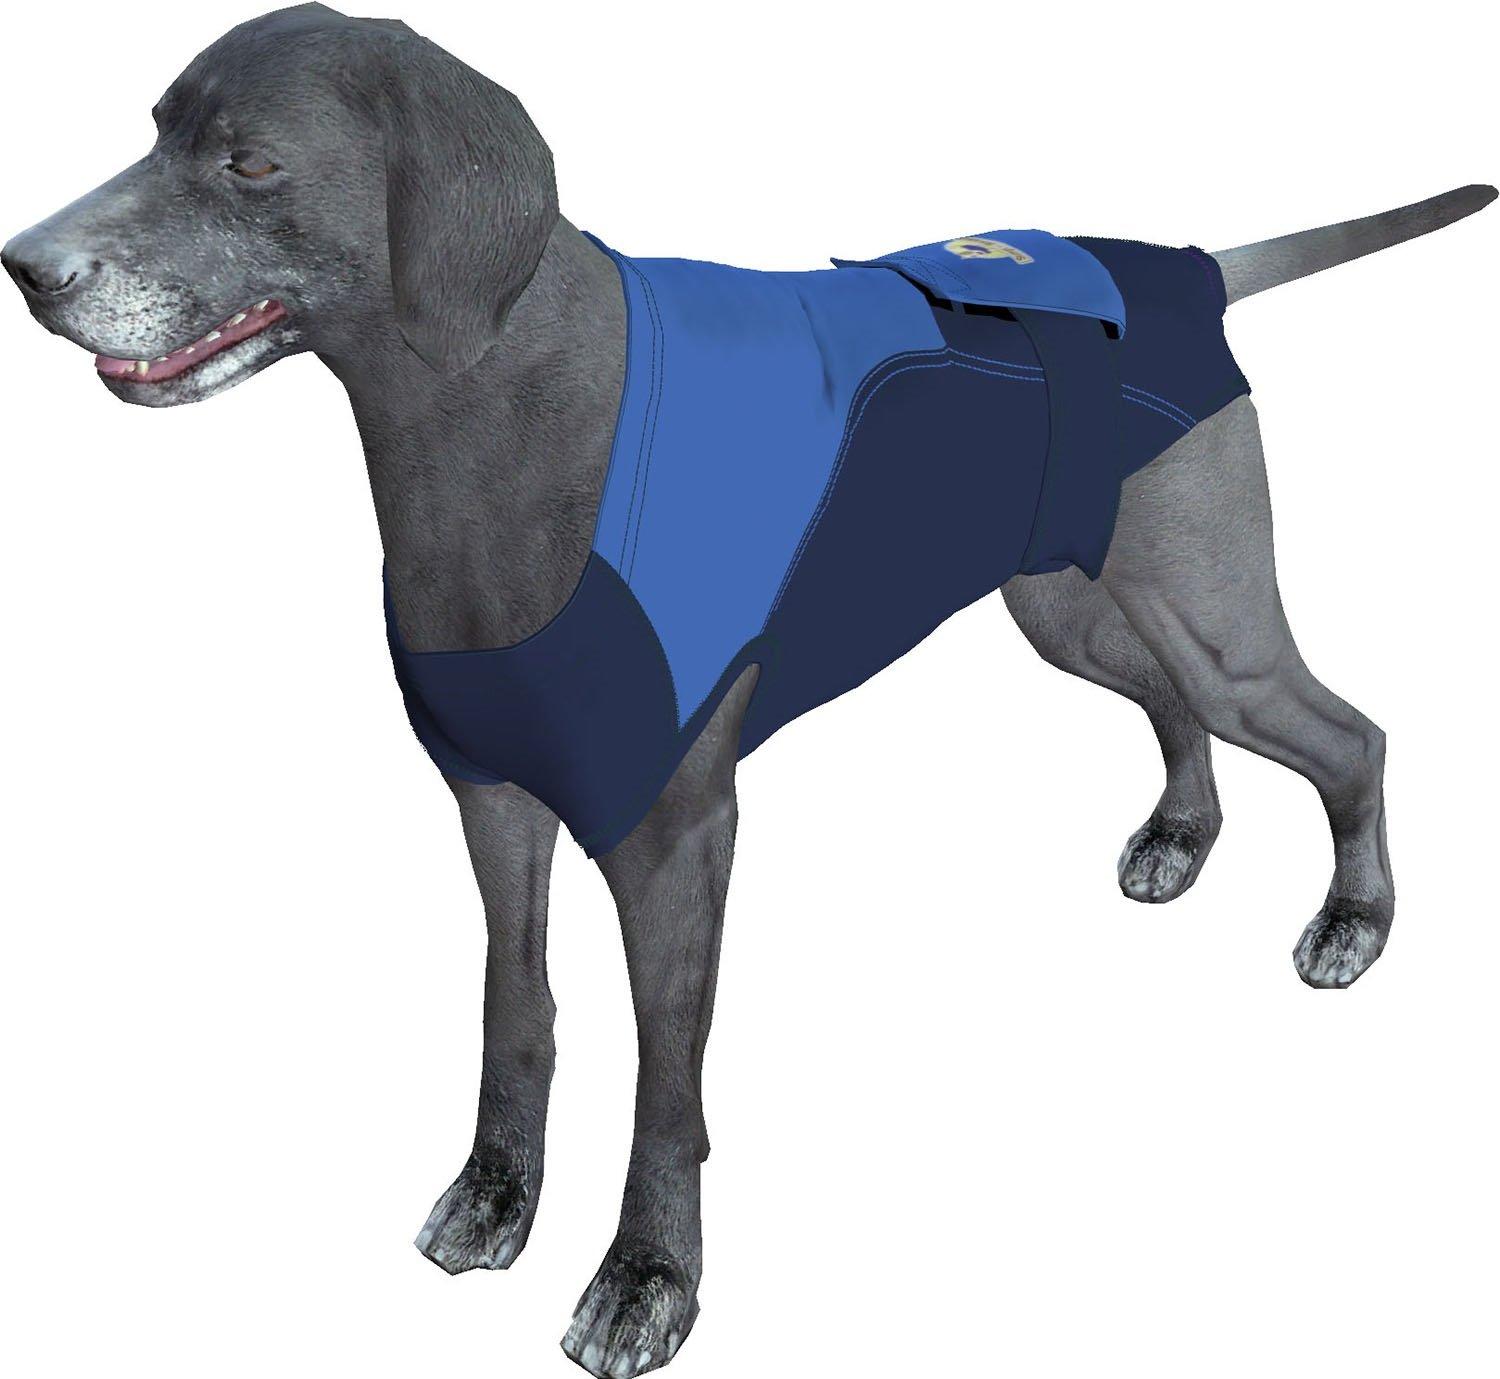 Surgi~Snuggly Dog Surgery Recovery Suit E Collar Alternative with American Textile Protects Your Pet's Wounds While It Calms, Aids Hot Spots, and Provides Anti Anxiety Relief (LS-BB-EC)